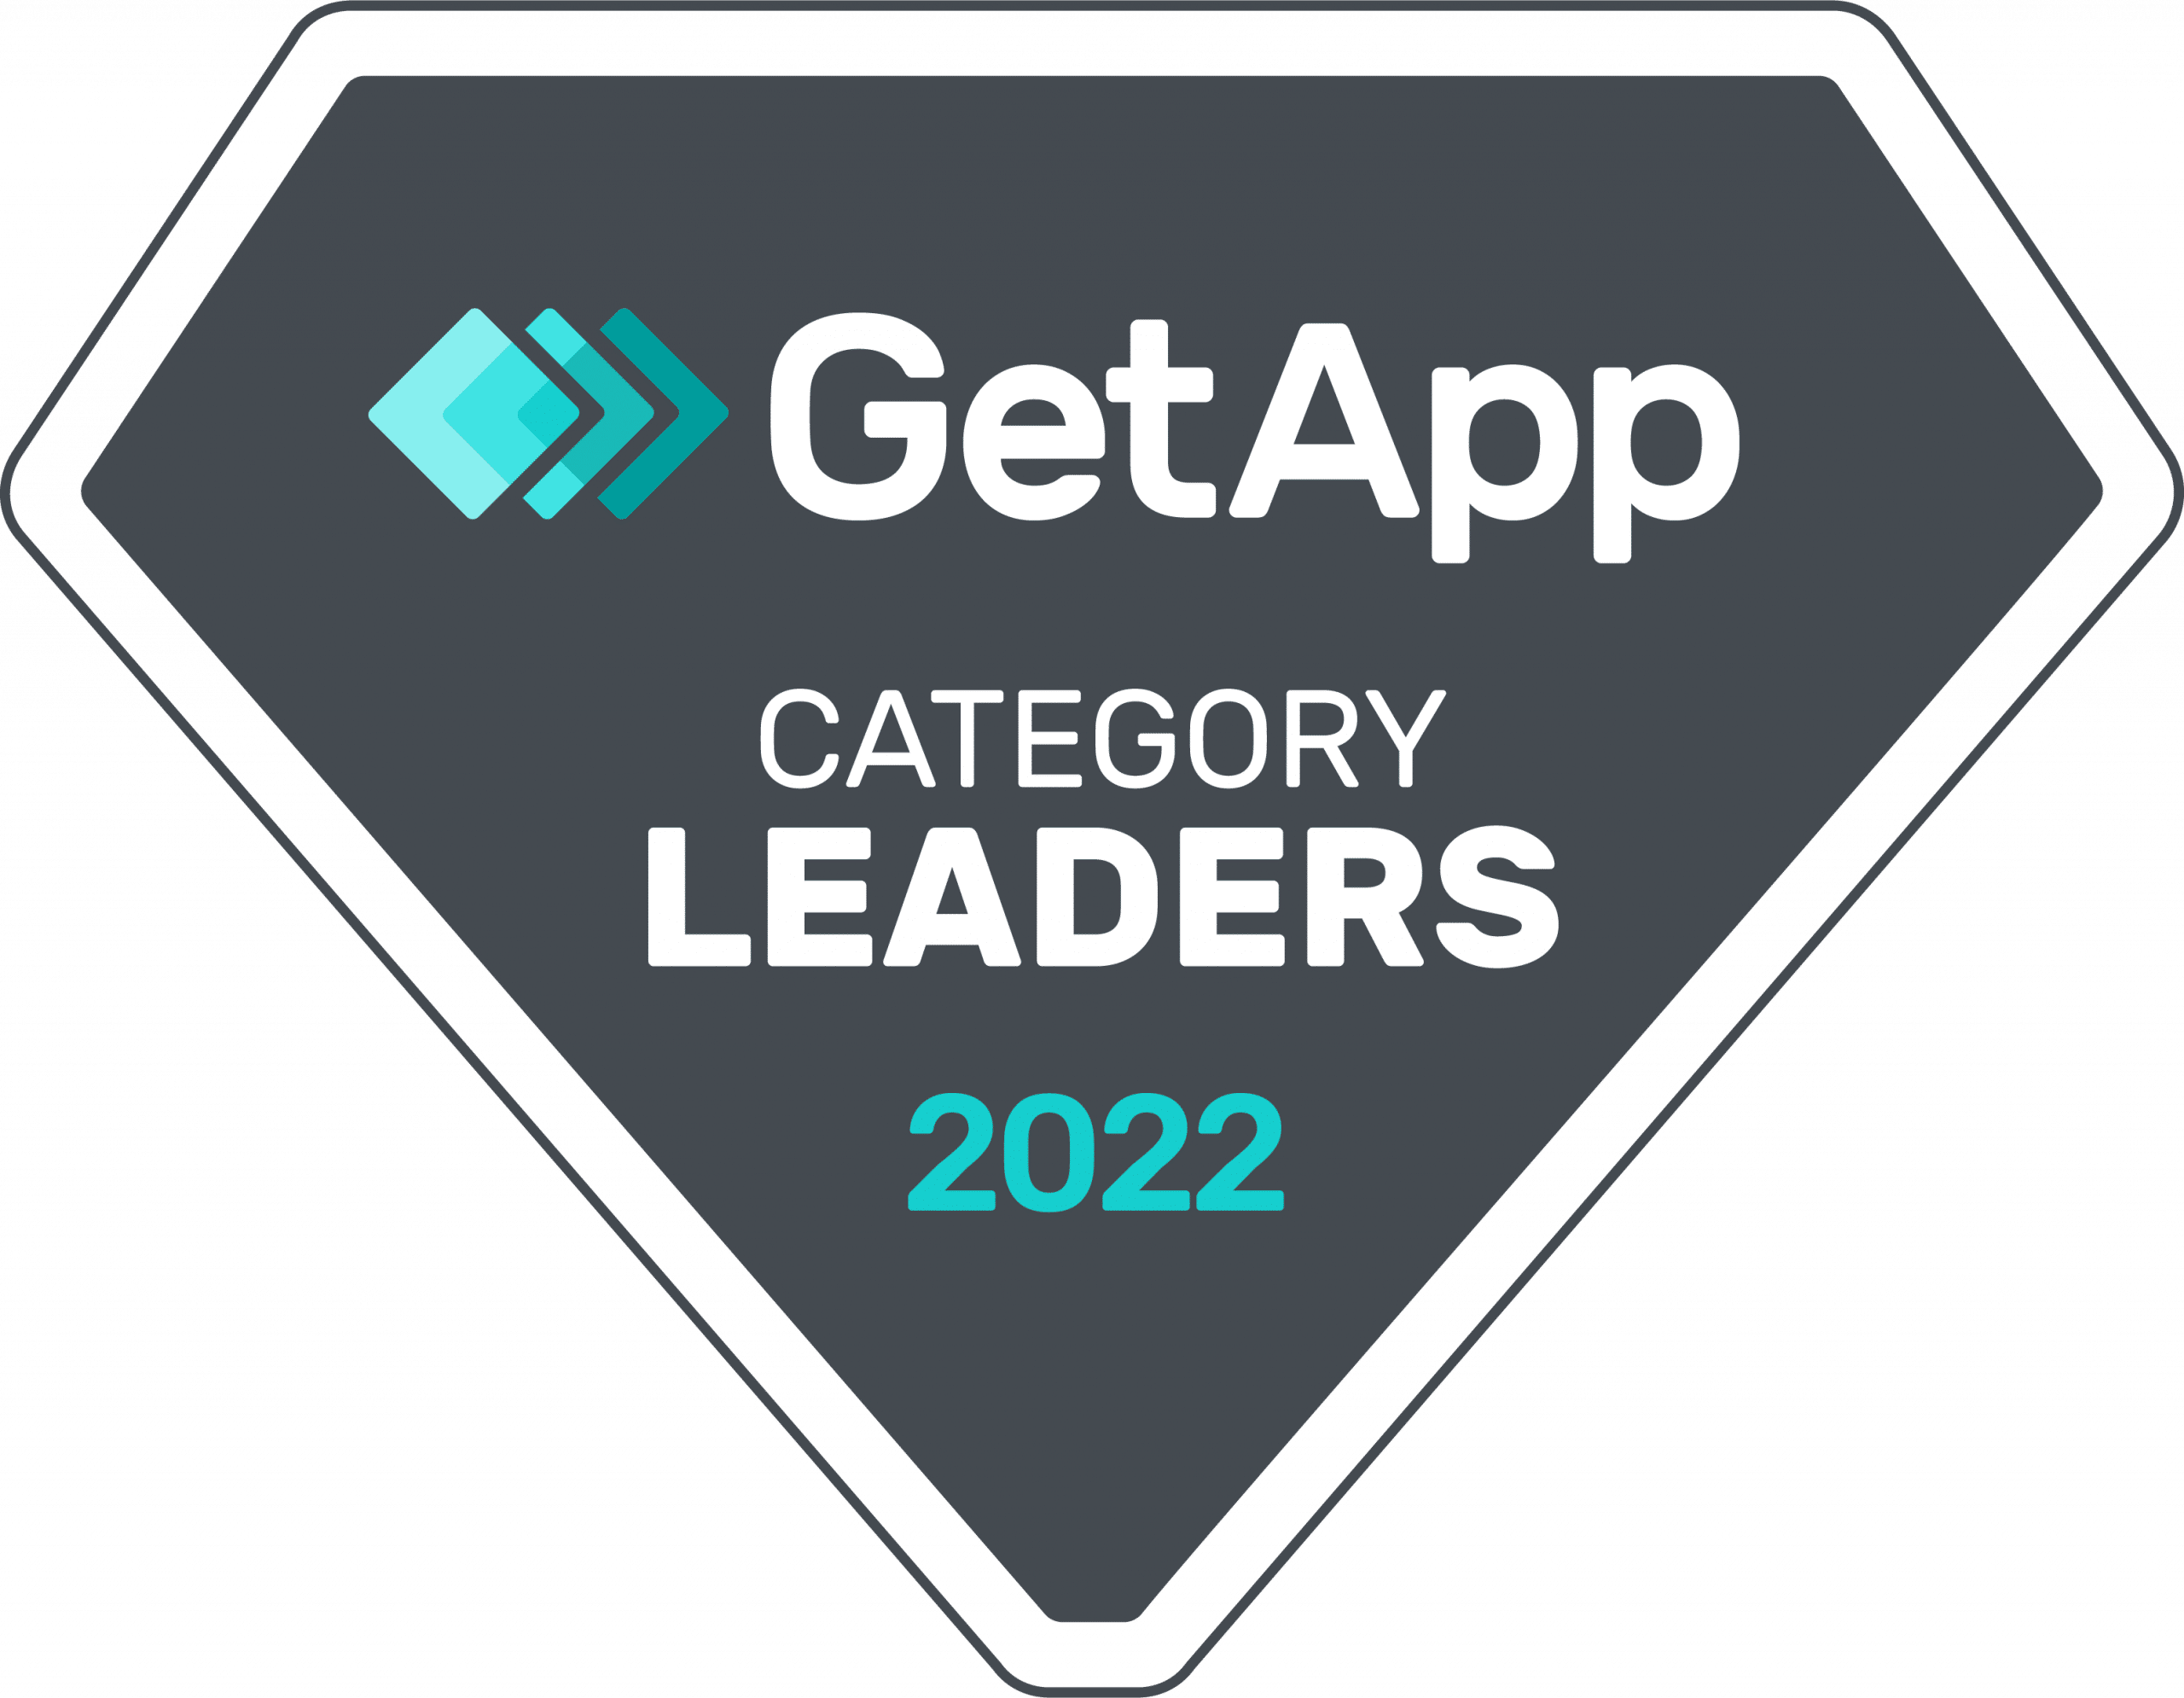 GetApp Category Leaders for 2022